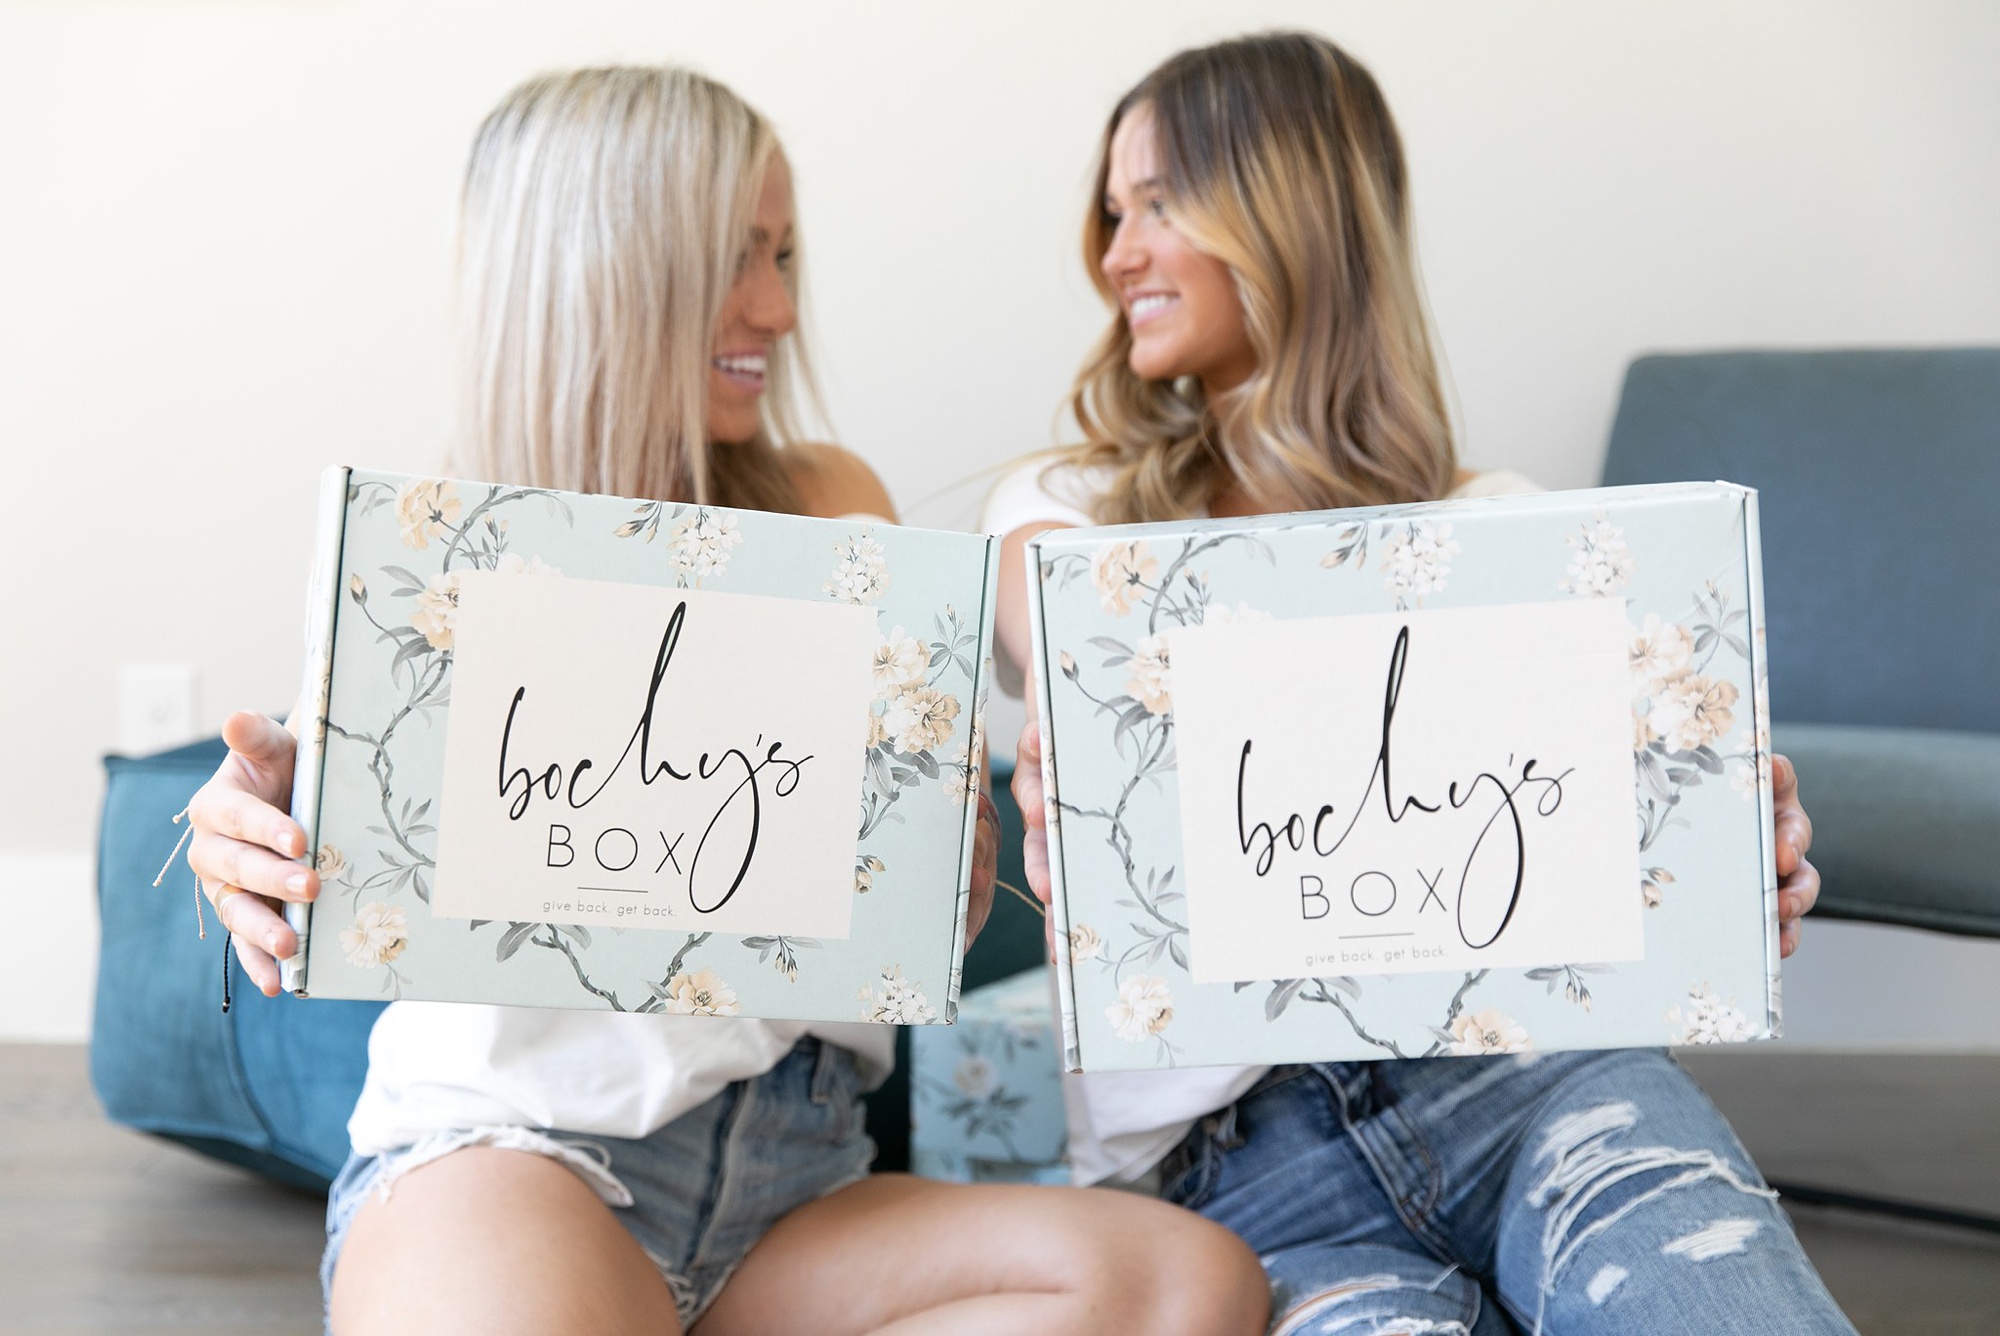 women hold Bochy's subscription box during styled shoot